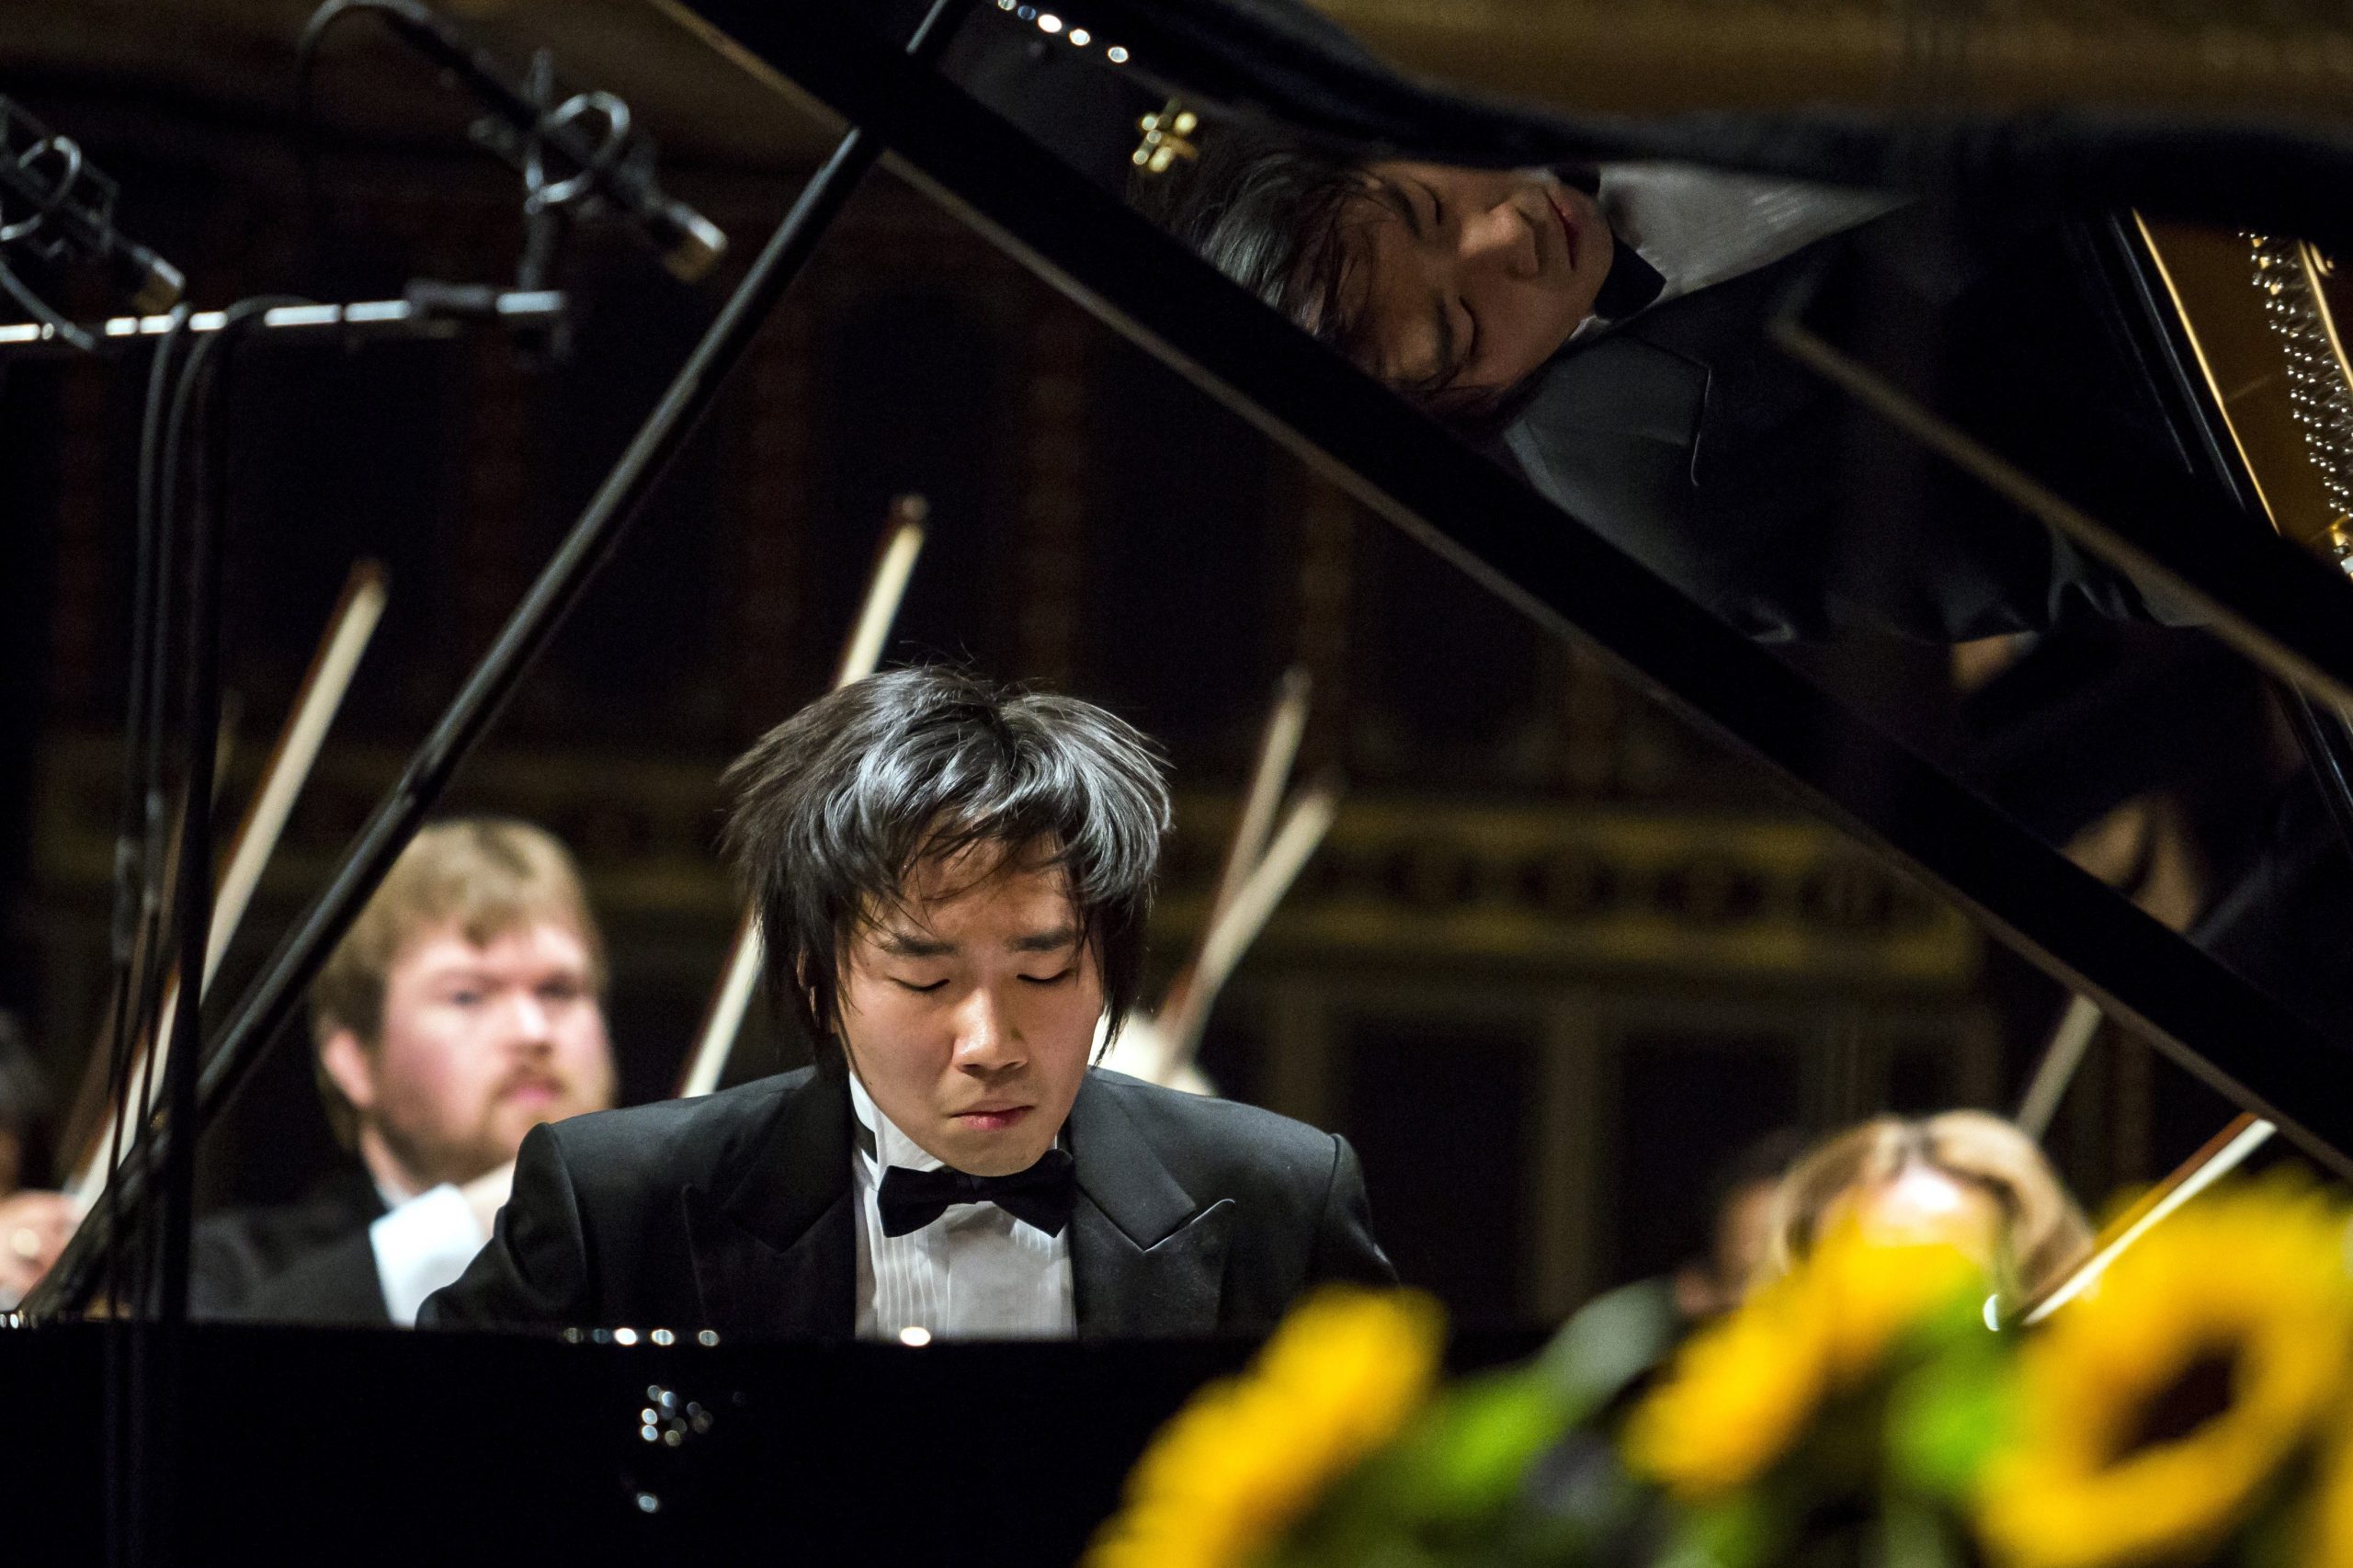 Thirty-two Young Contenders at 15th Liszt International Piano Competition in September